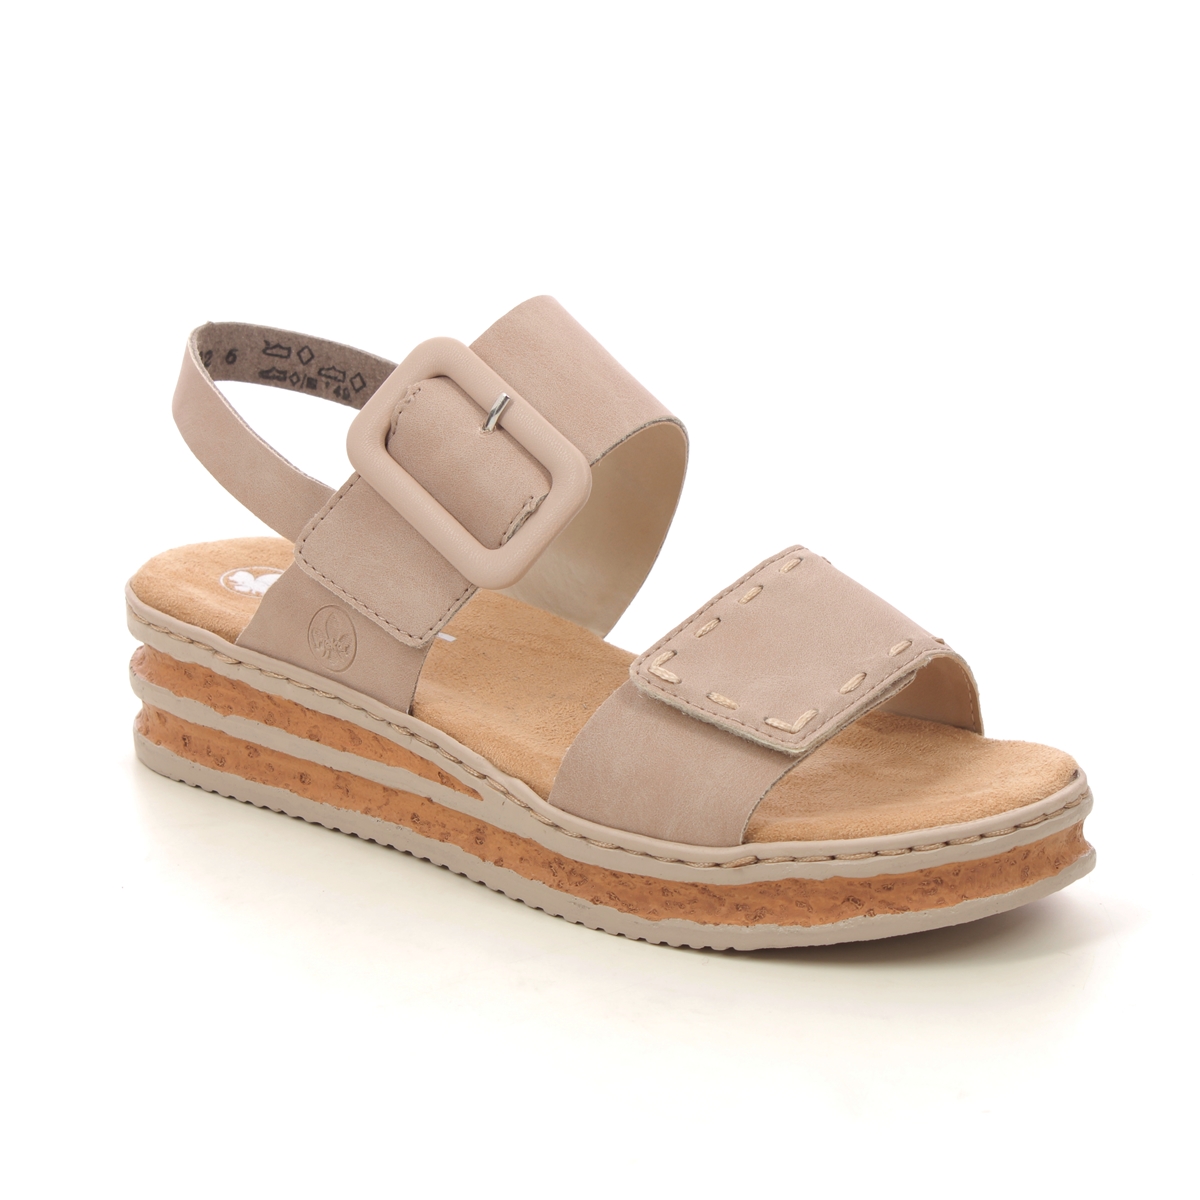 Rieker 62950-62 Nude Womens Wedge Sandals in a Plain Man-made in Size 41